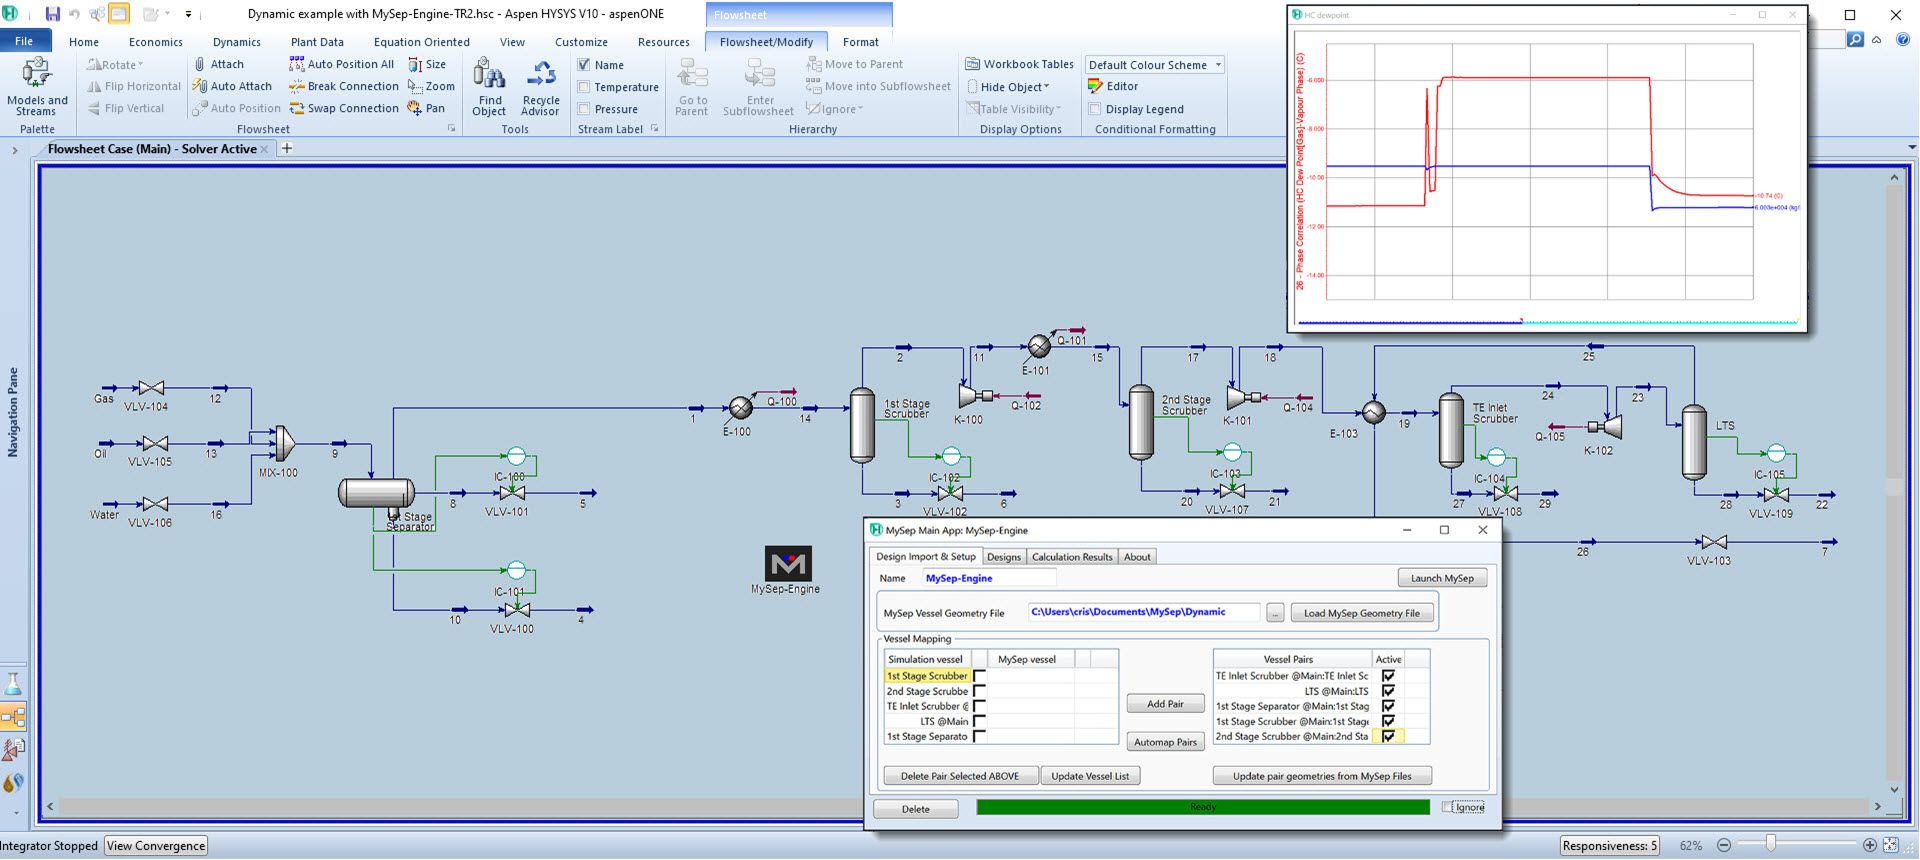 MySep-Engine Dynamic Simulation with Hydrocarbon Dewpoint Specification